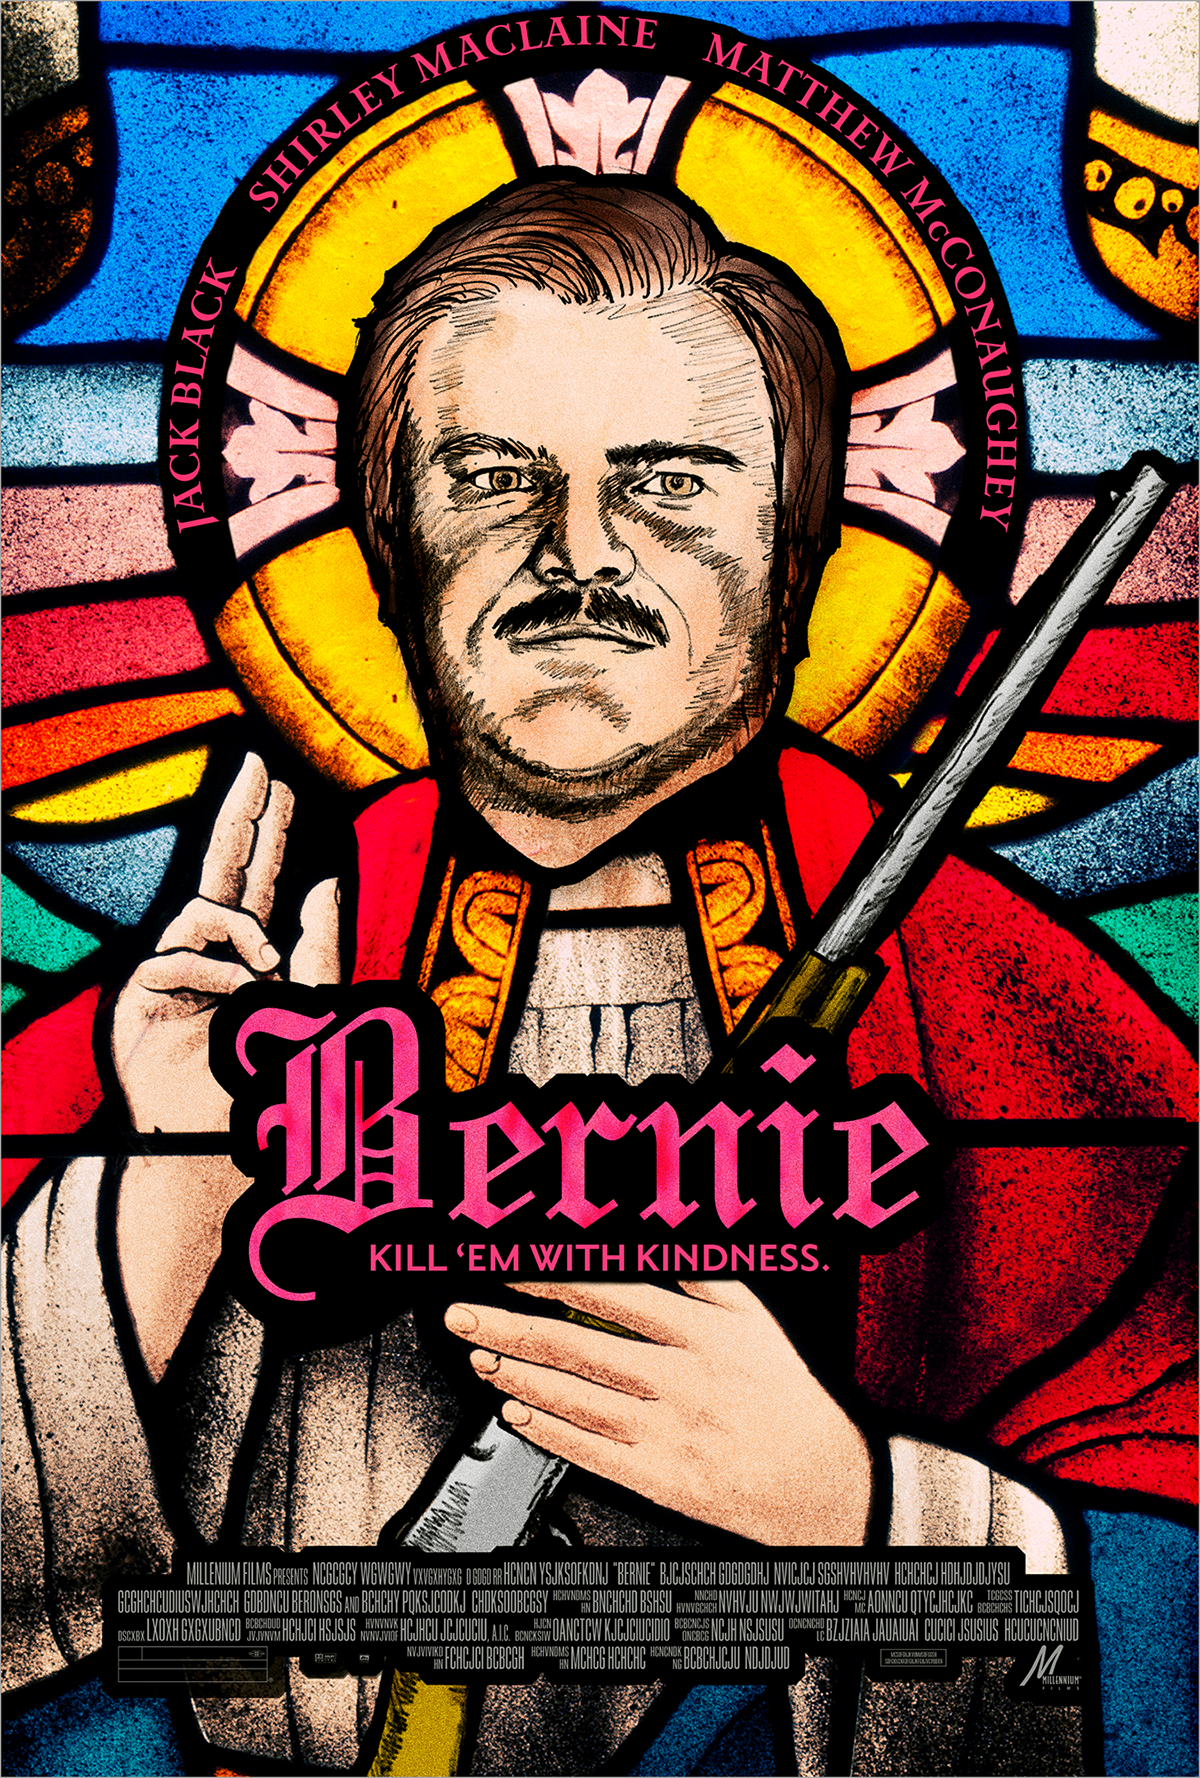 jack black bernie movie poster stained glass key art Theatrical 1sheet 1 sheet